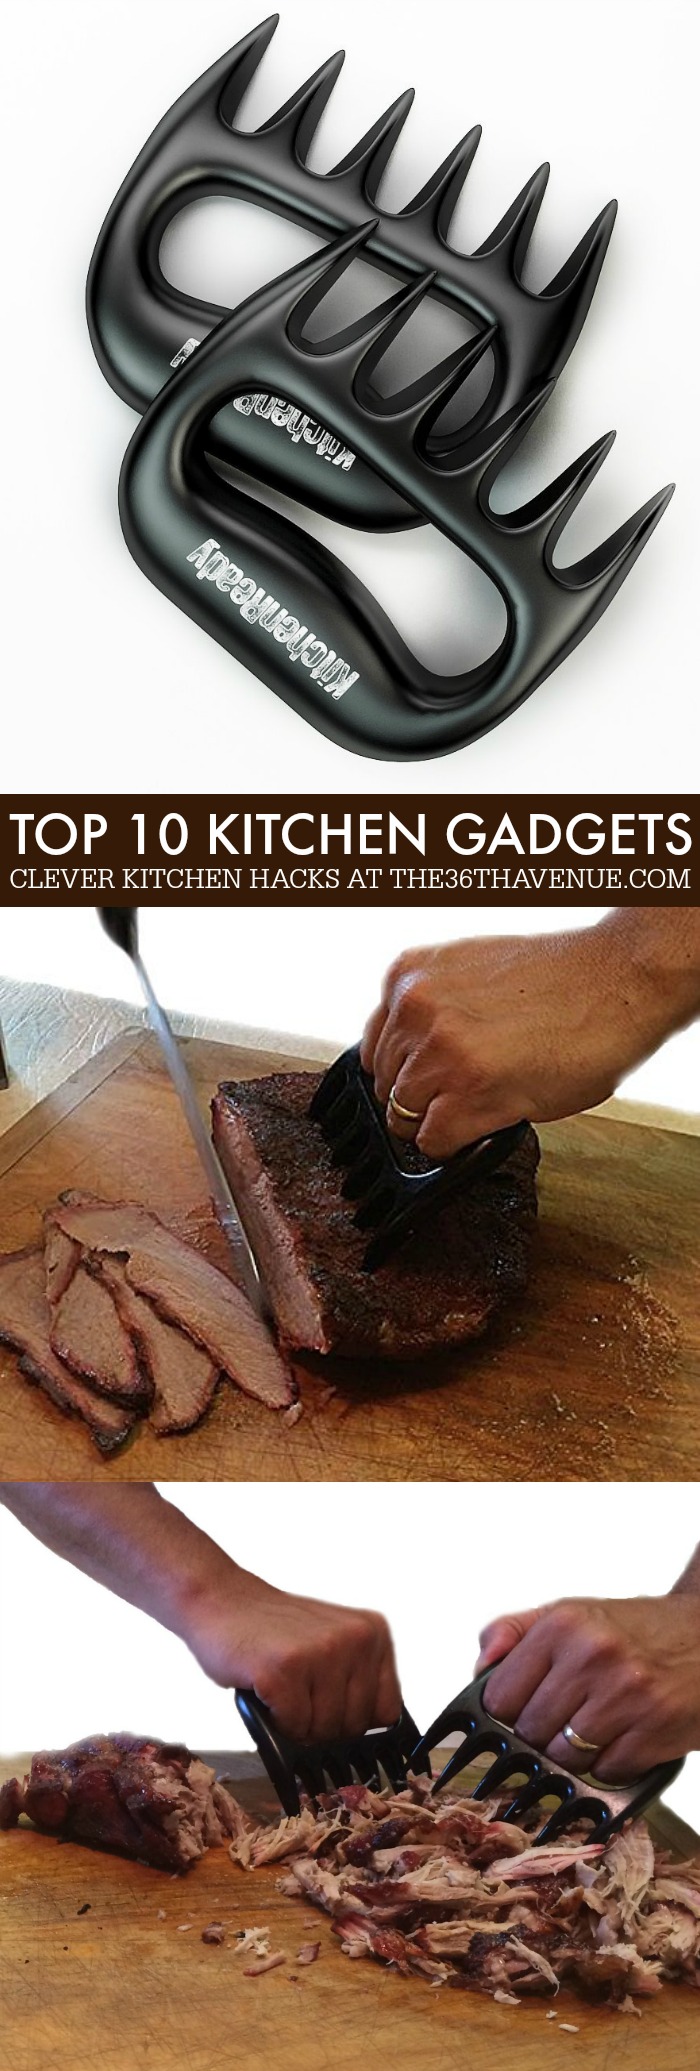 Kitchen Gadgets - 10 CLEVER Gadgets that will make your life easier! See them all at the36thavenue.com #kitchen